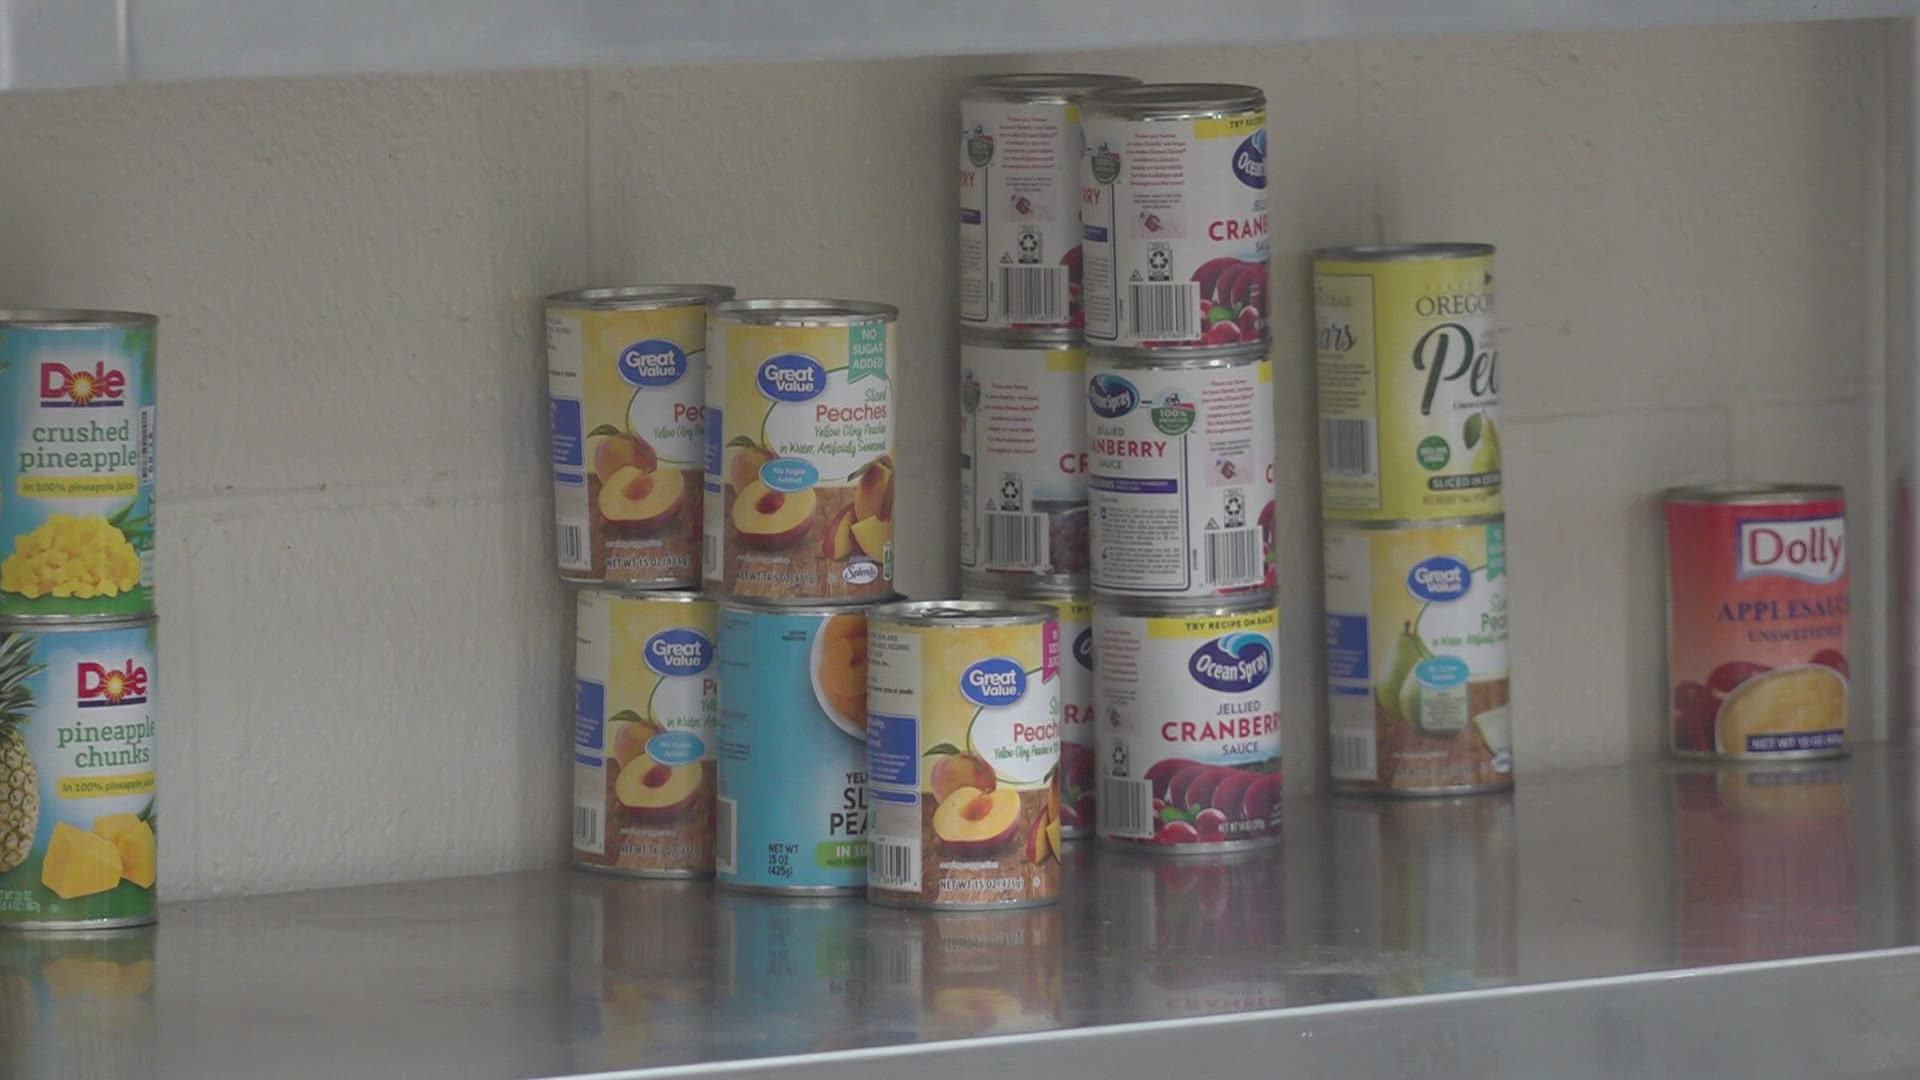 The Greensboro Urban Ministry (GUM) Food Pantry could potentially run out of food if they don't receive more donations.